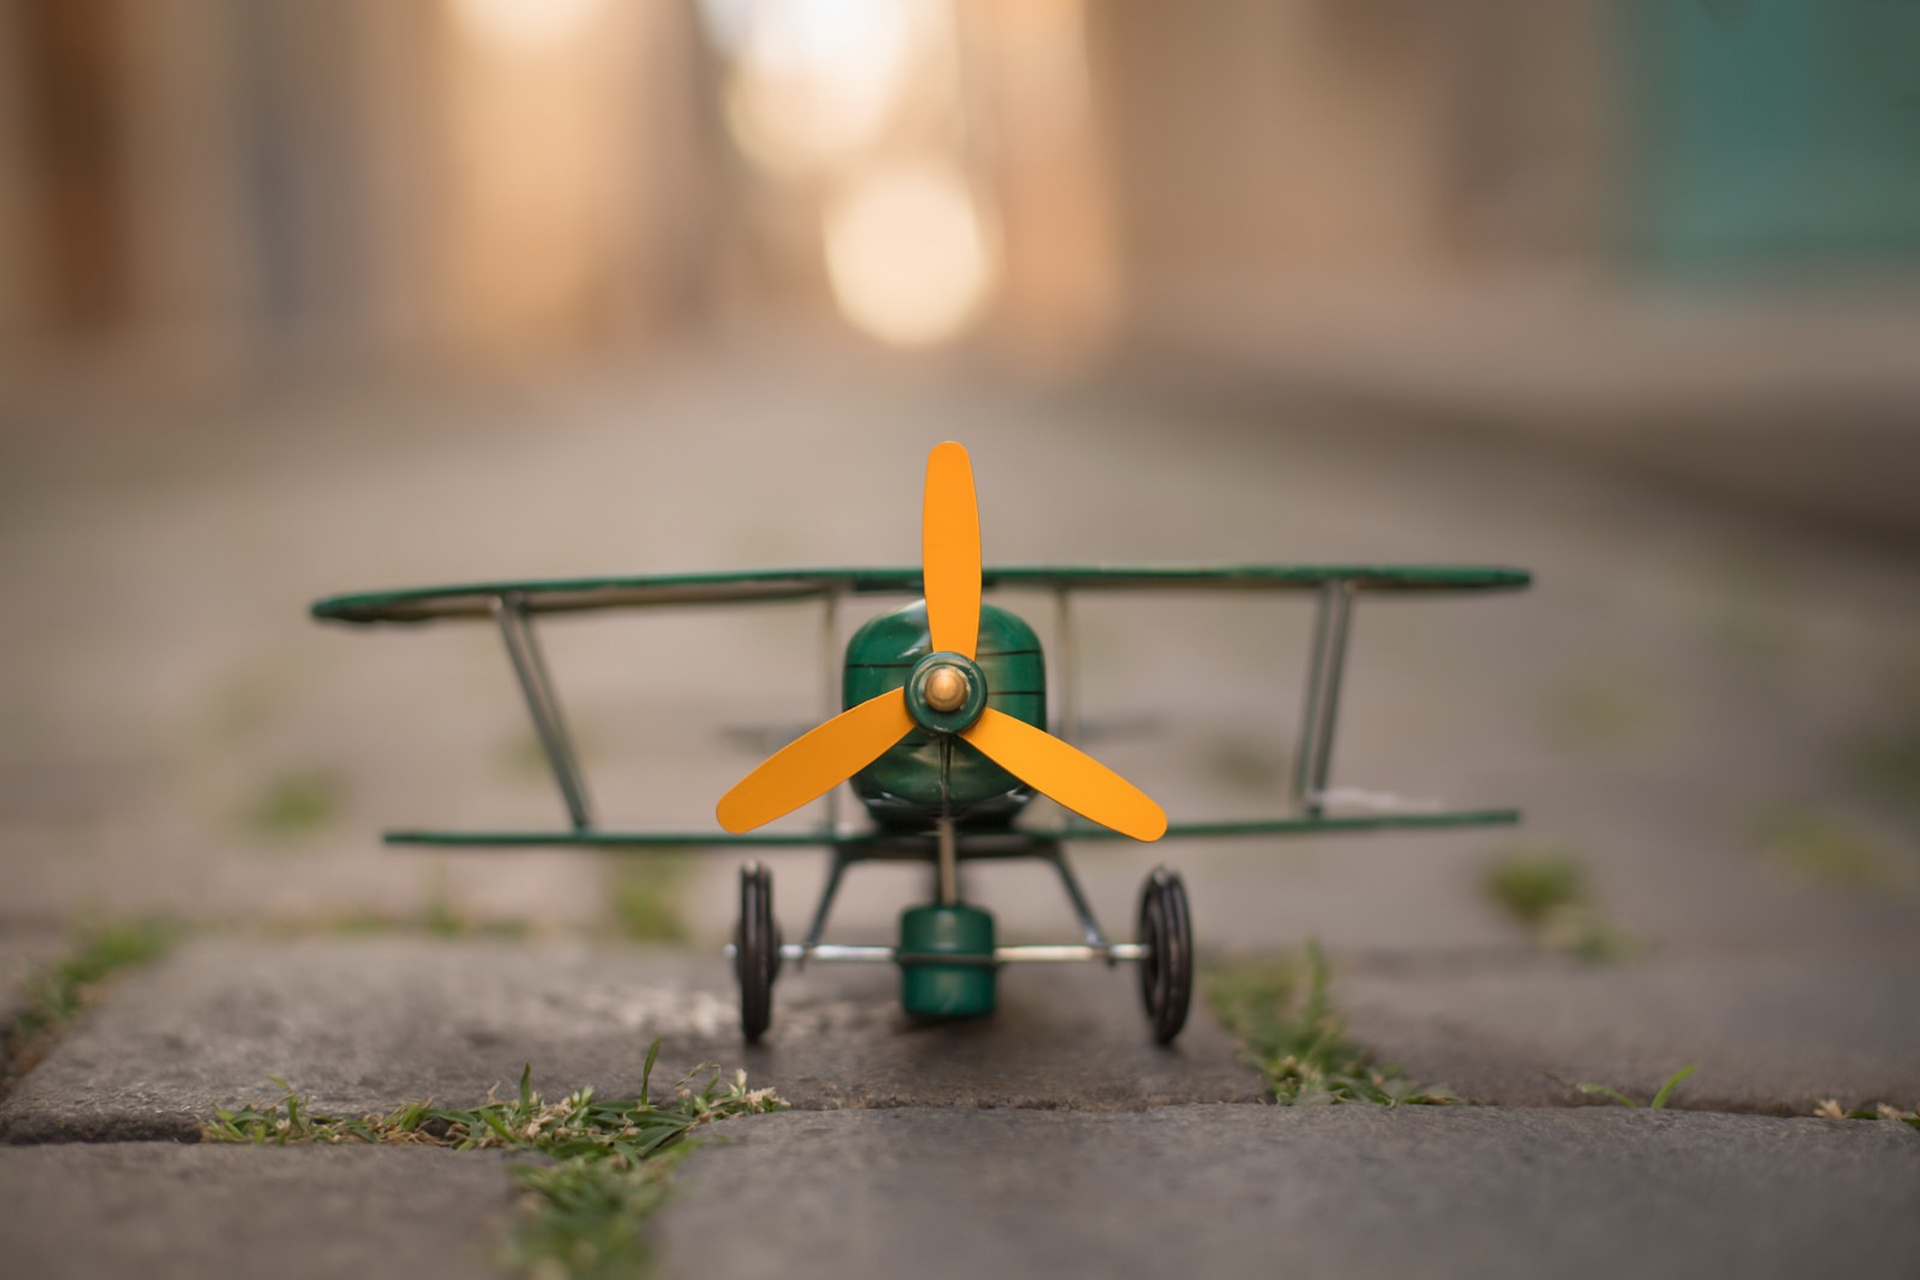 Aircraft Depth Of Field Toy 1920x1280